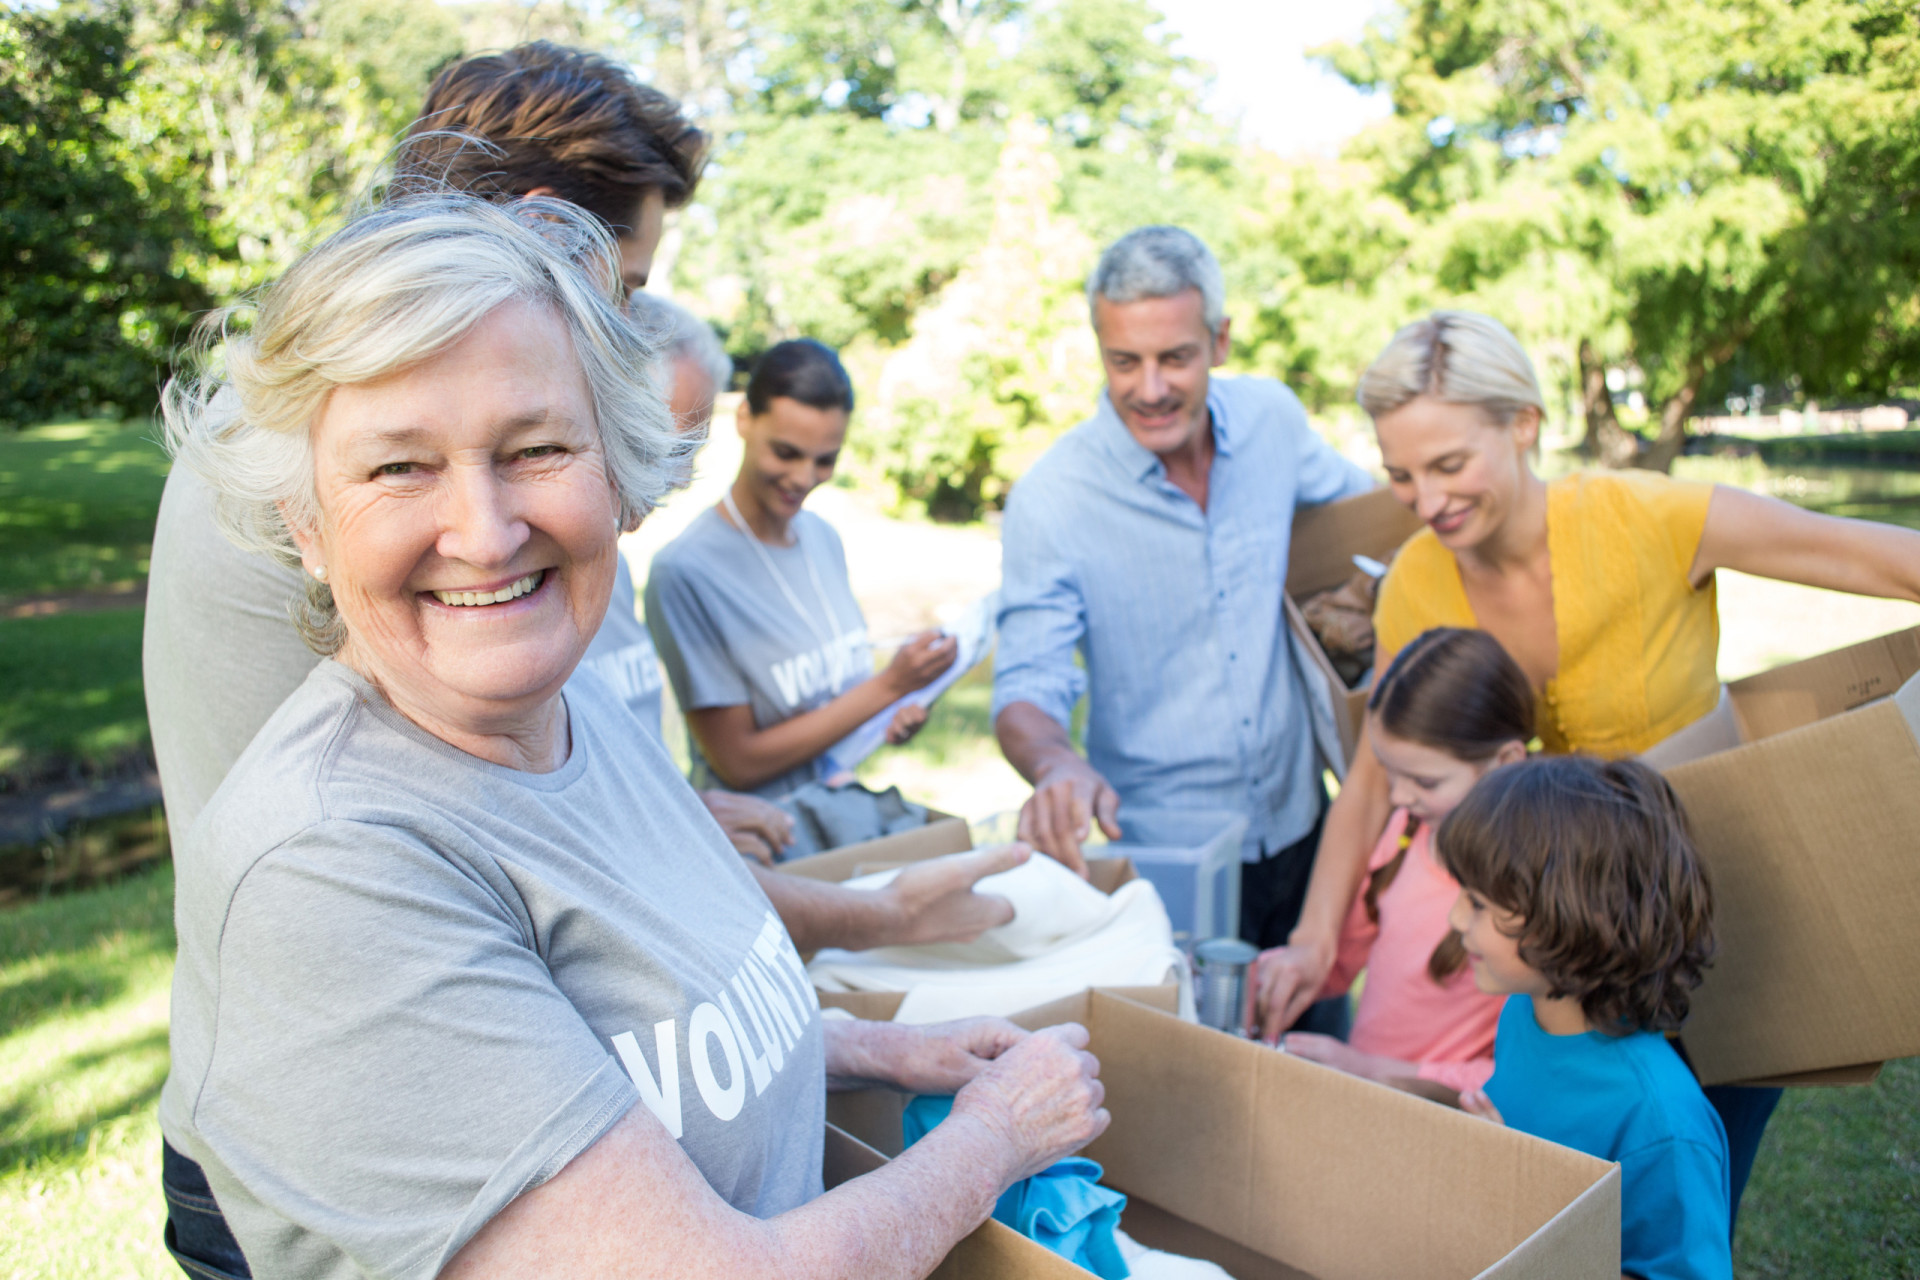 <p>Come together with mom and share love with the community. Whether it's collecting food for those in need or planting seeds in a community garden, there are countless ways to spread joy.</p><p><a href="https://www.msn.com/en-us/community/channel/vid-7xx8mnucu55yw63we9va2gwr7uihbxwc68fxqp25x6tg4ftibpra?cvid=94631541bc0f4f89bfd59158d696ad7e">Follow us and access great exclusive content every day</a></p>